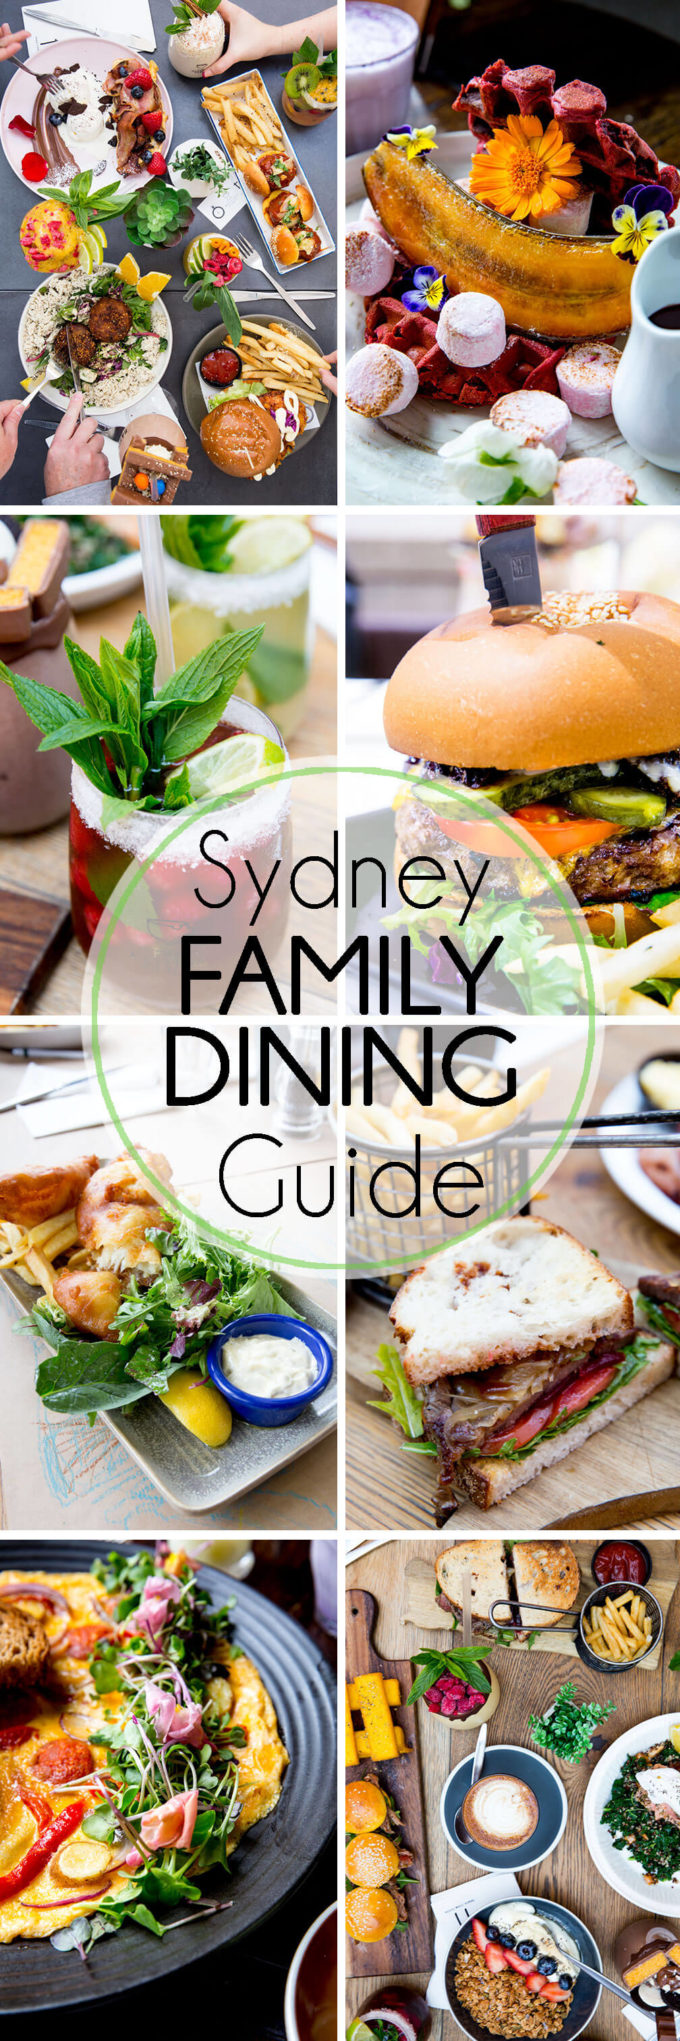 Sydney Family Dining Guide